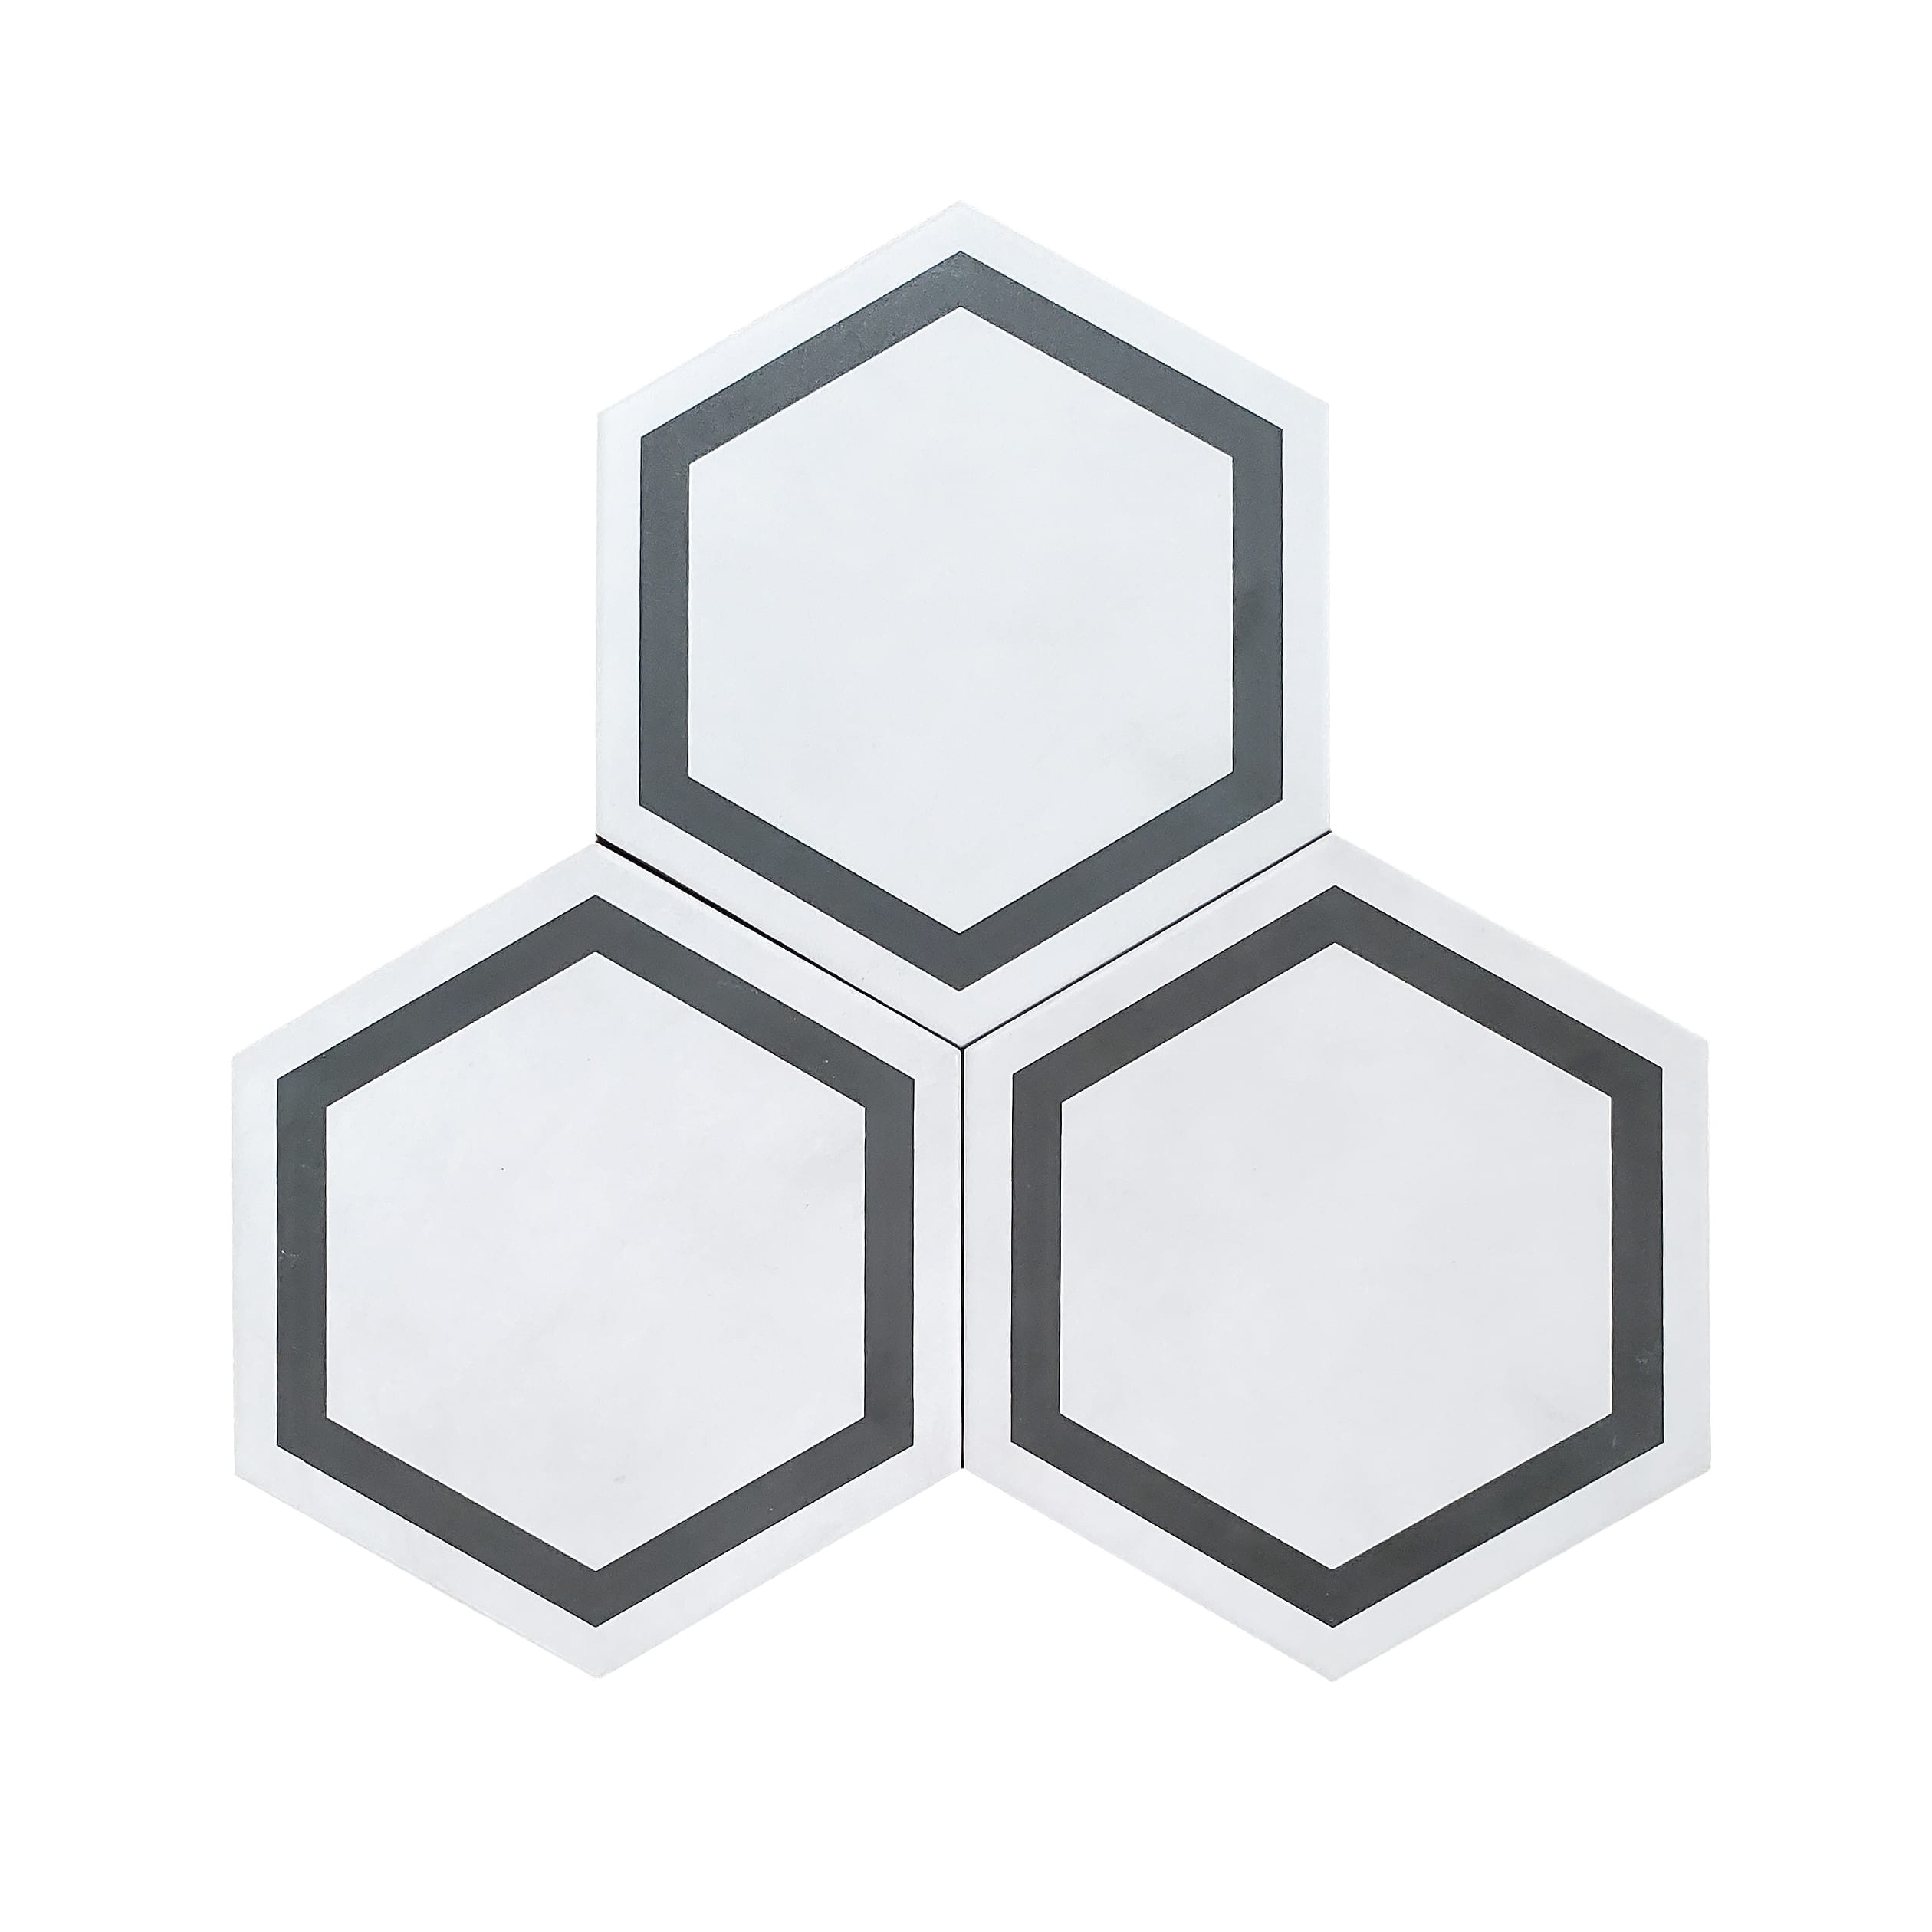 7×8 Form Hexagon Tile_Ivory wGraphite_2.80sfct_3.89r_3.25s